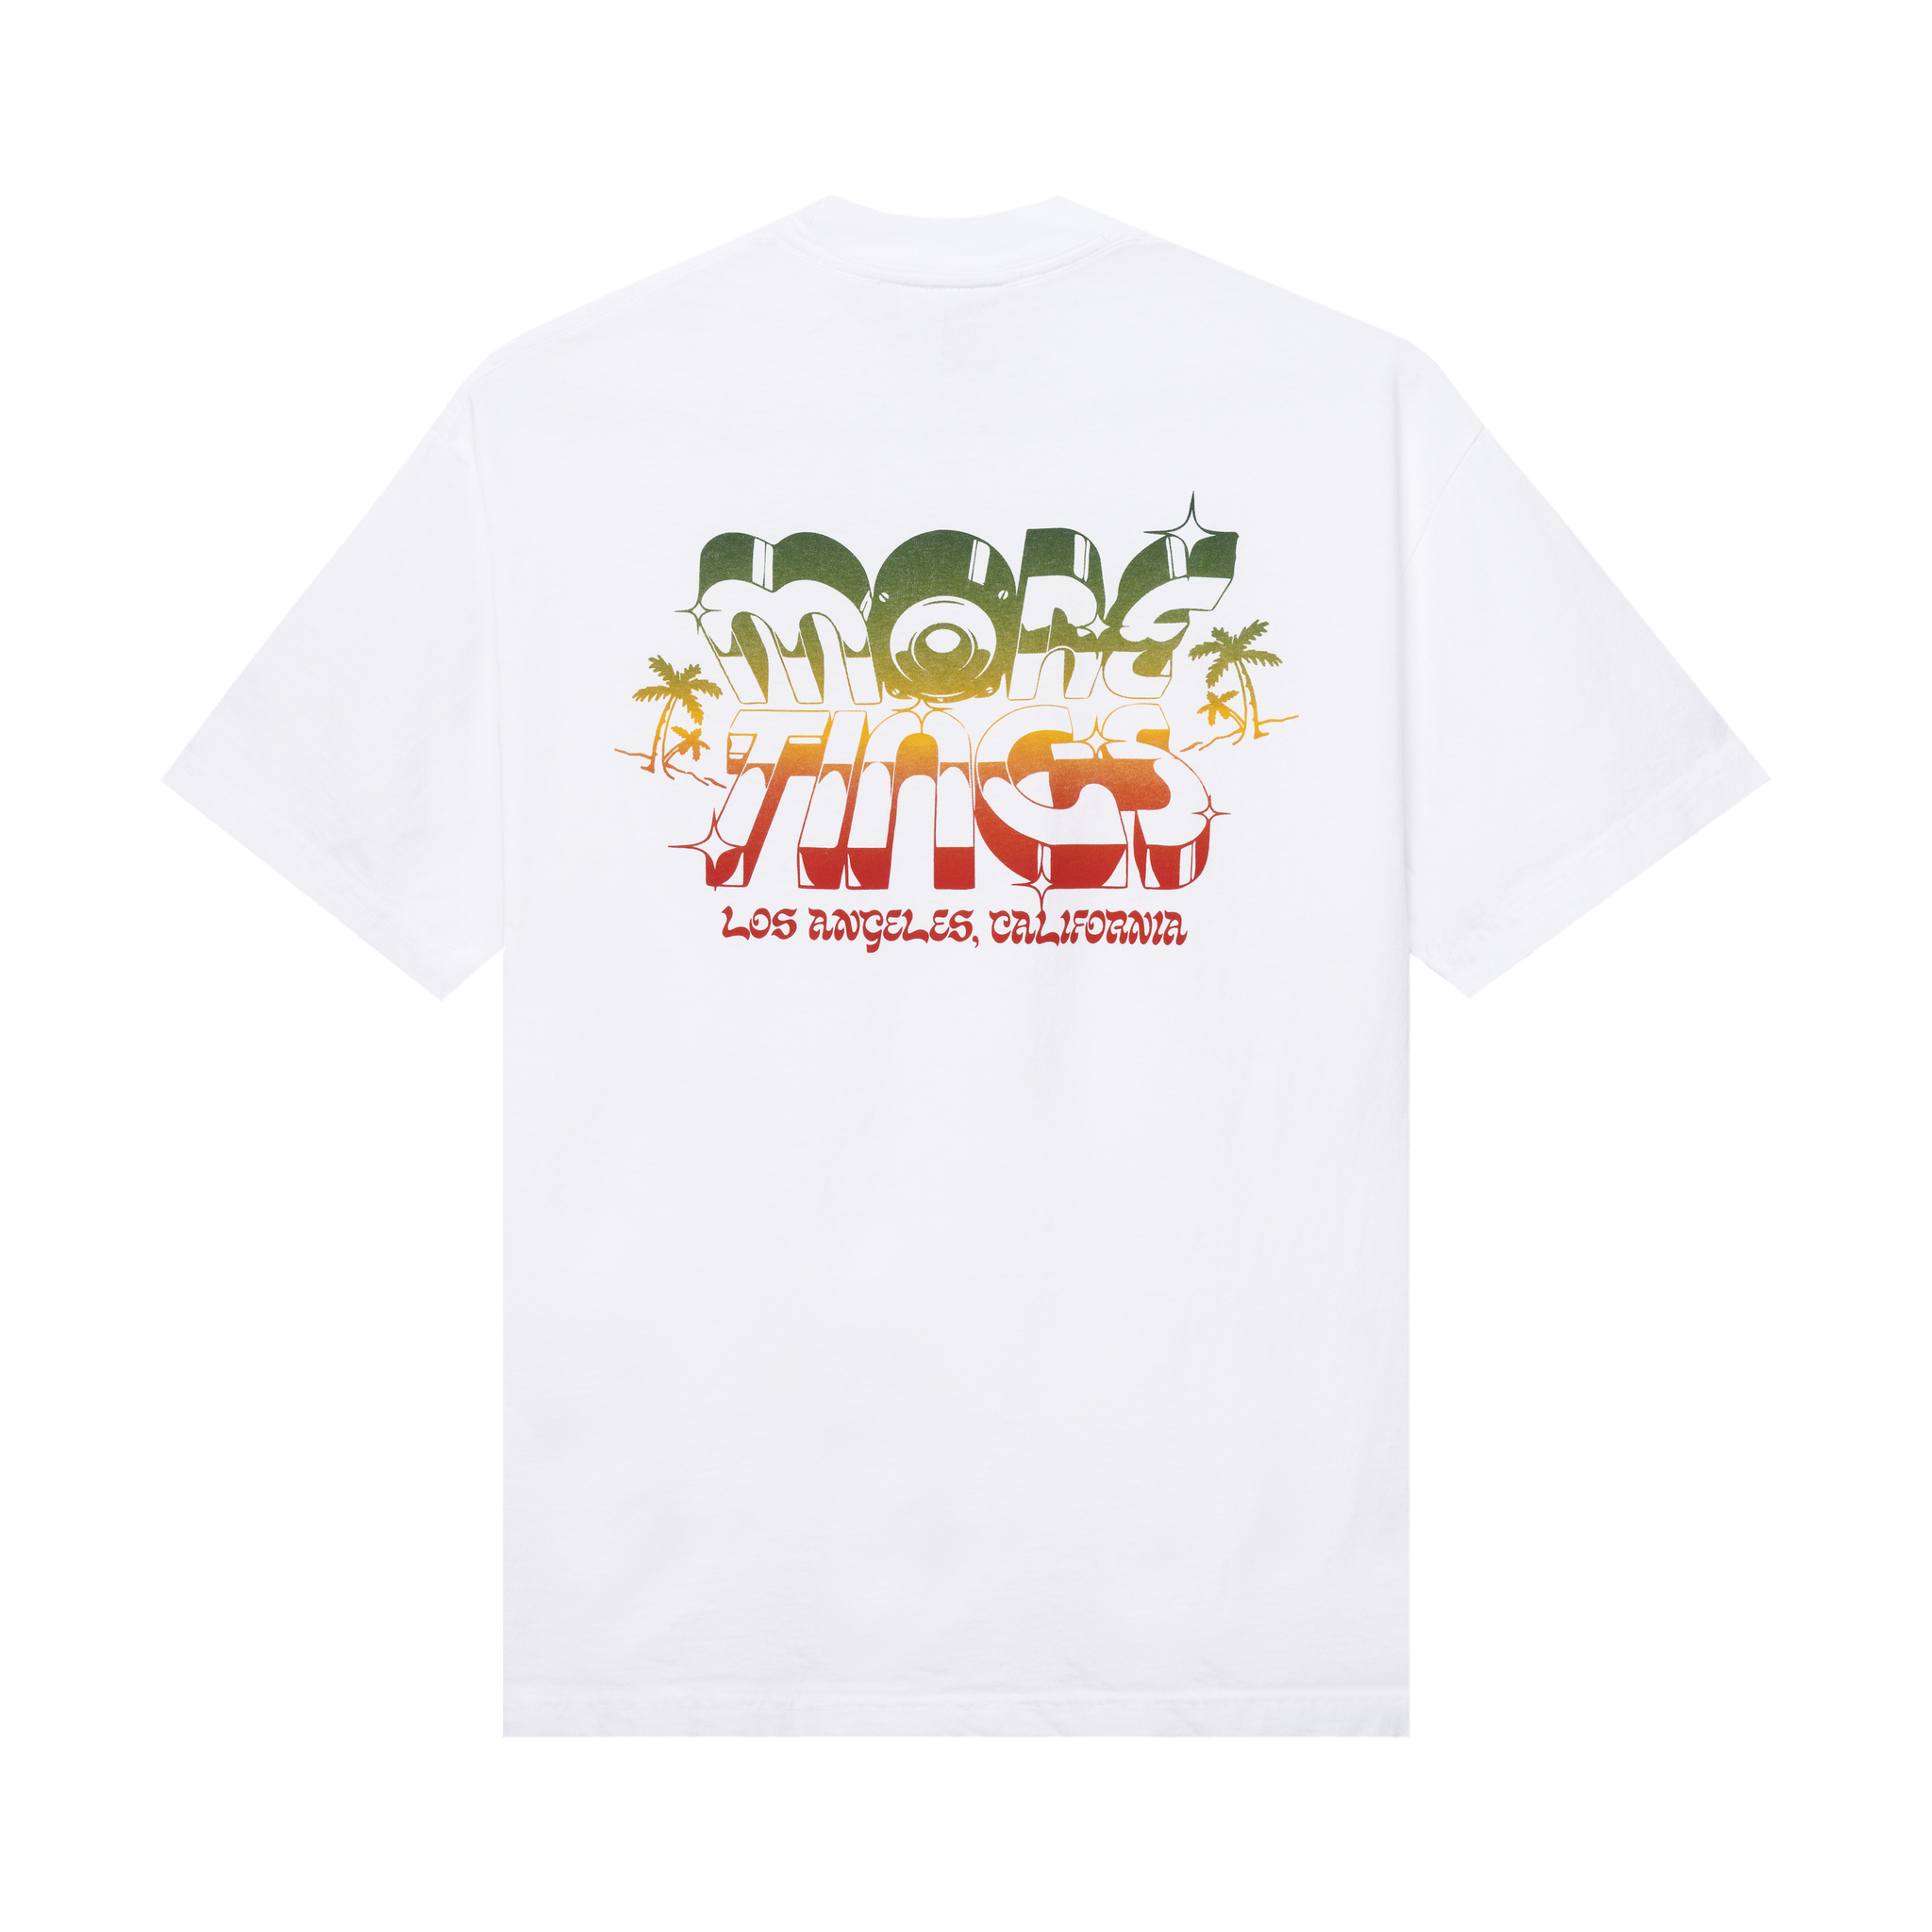 Very Special Tings Tee - White